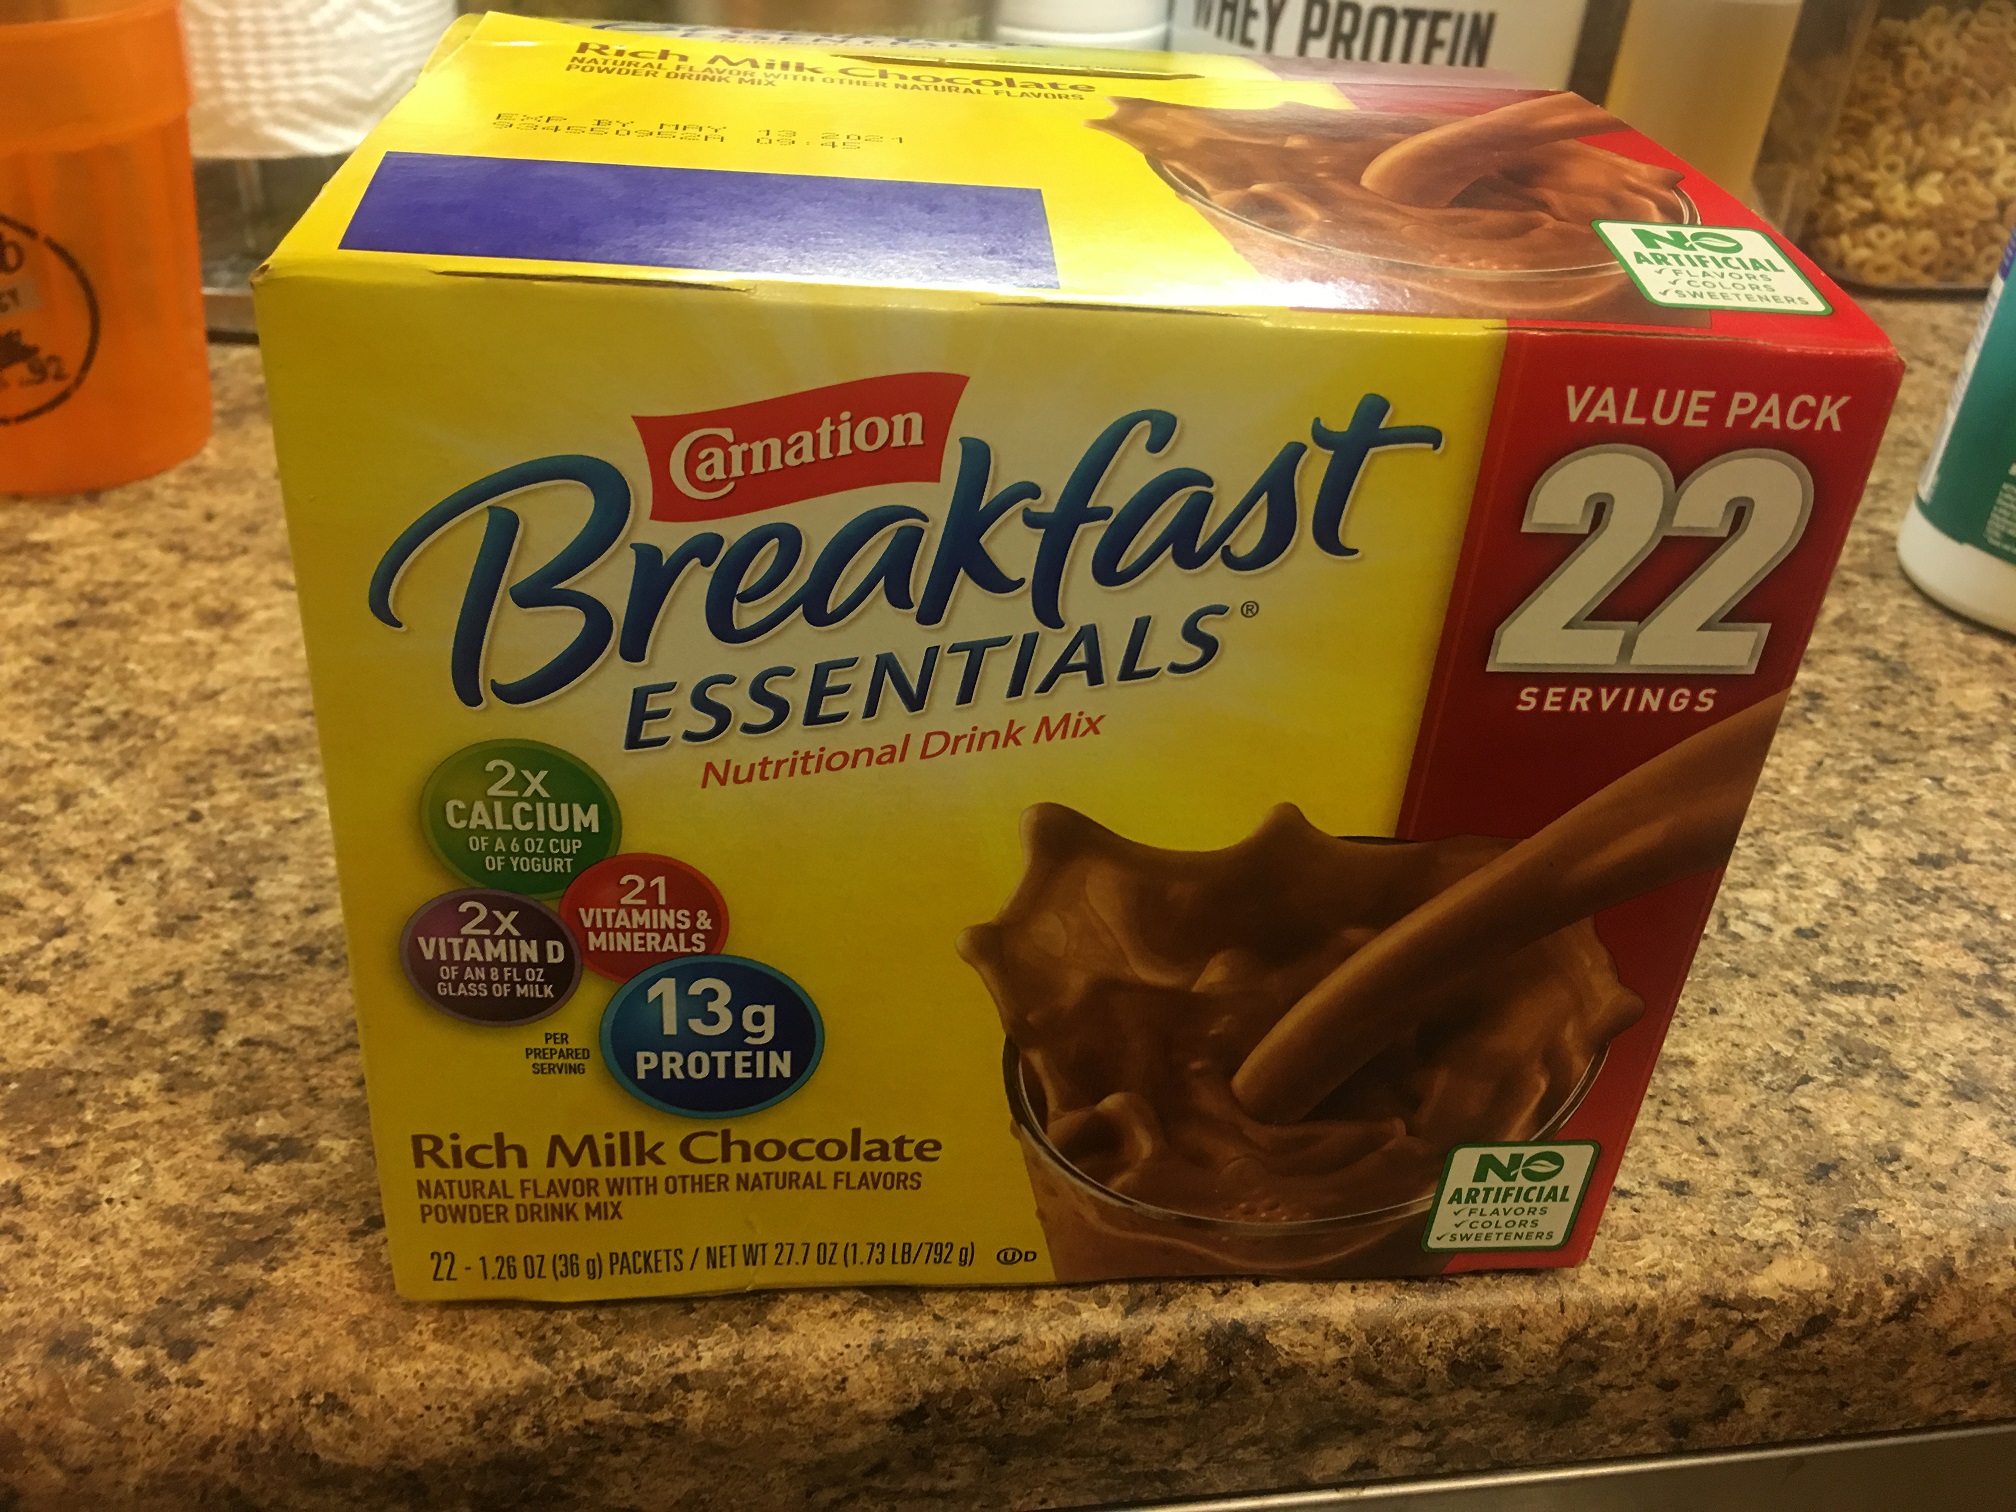 Breakfast Replacement, the best tasting of all, Carnation Breakfast Esentials